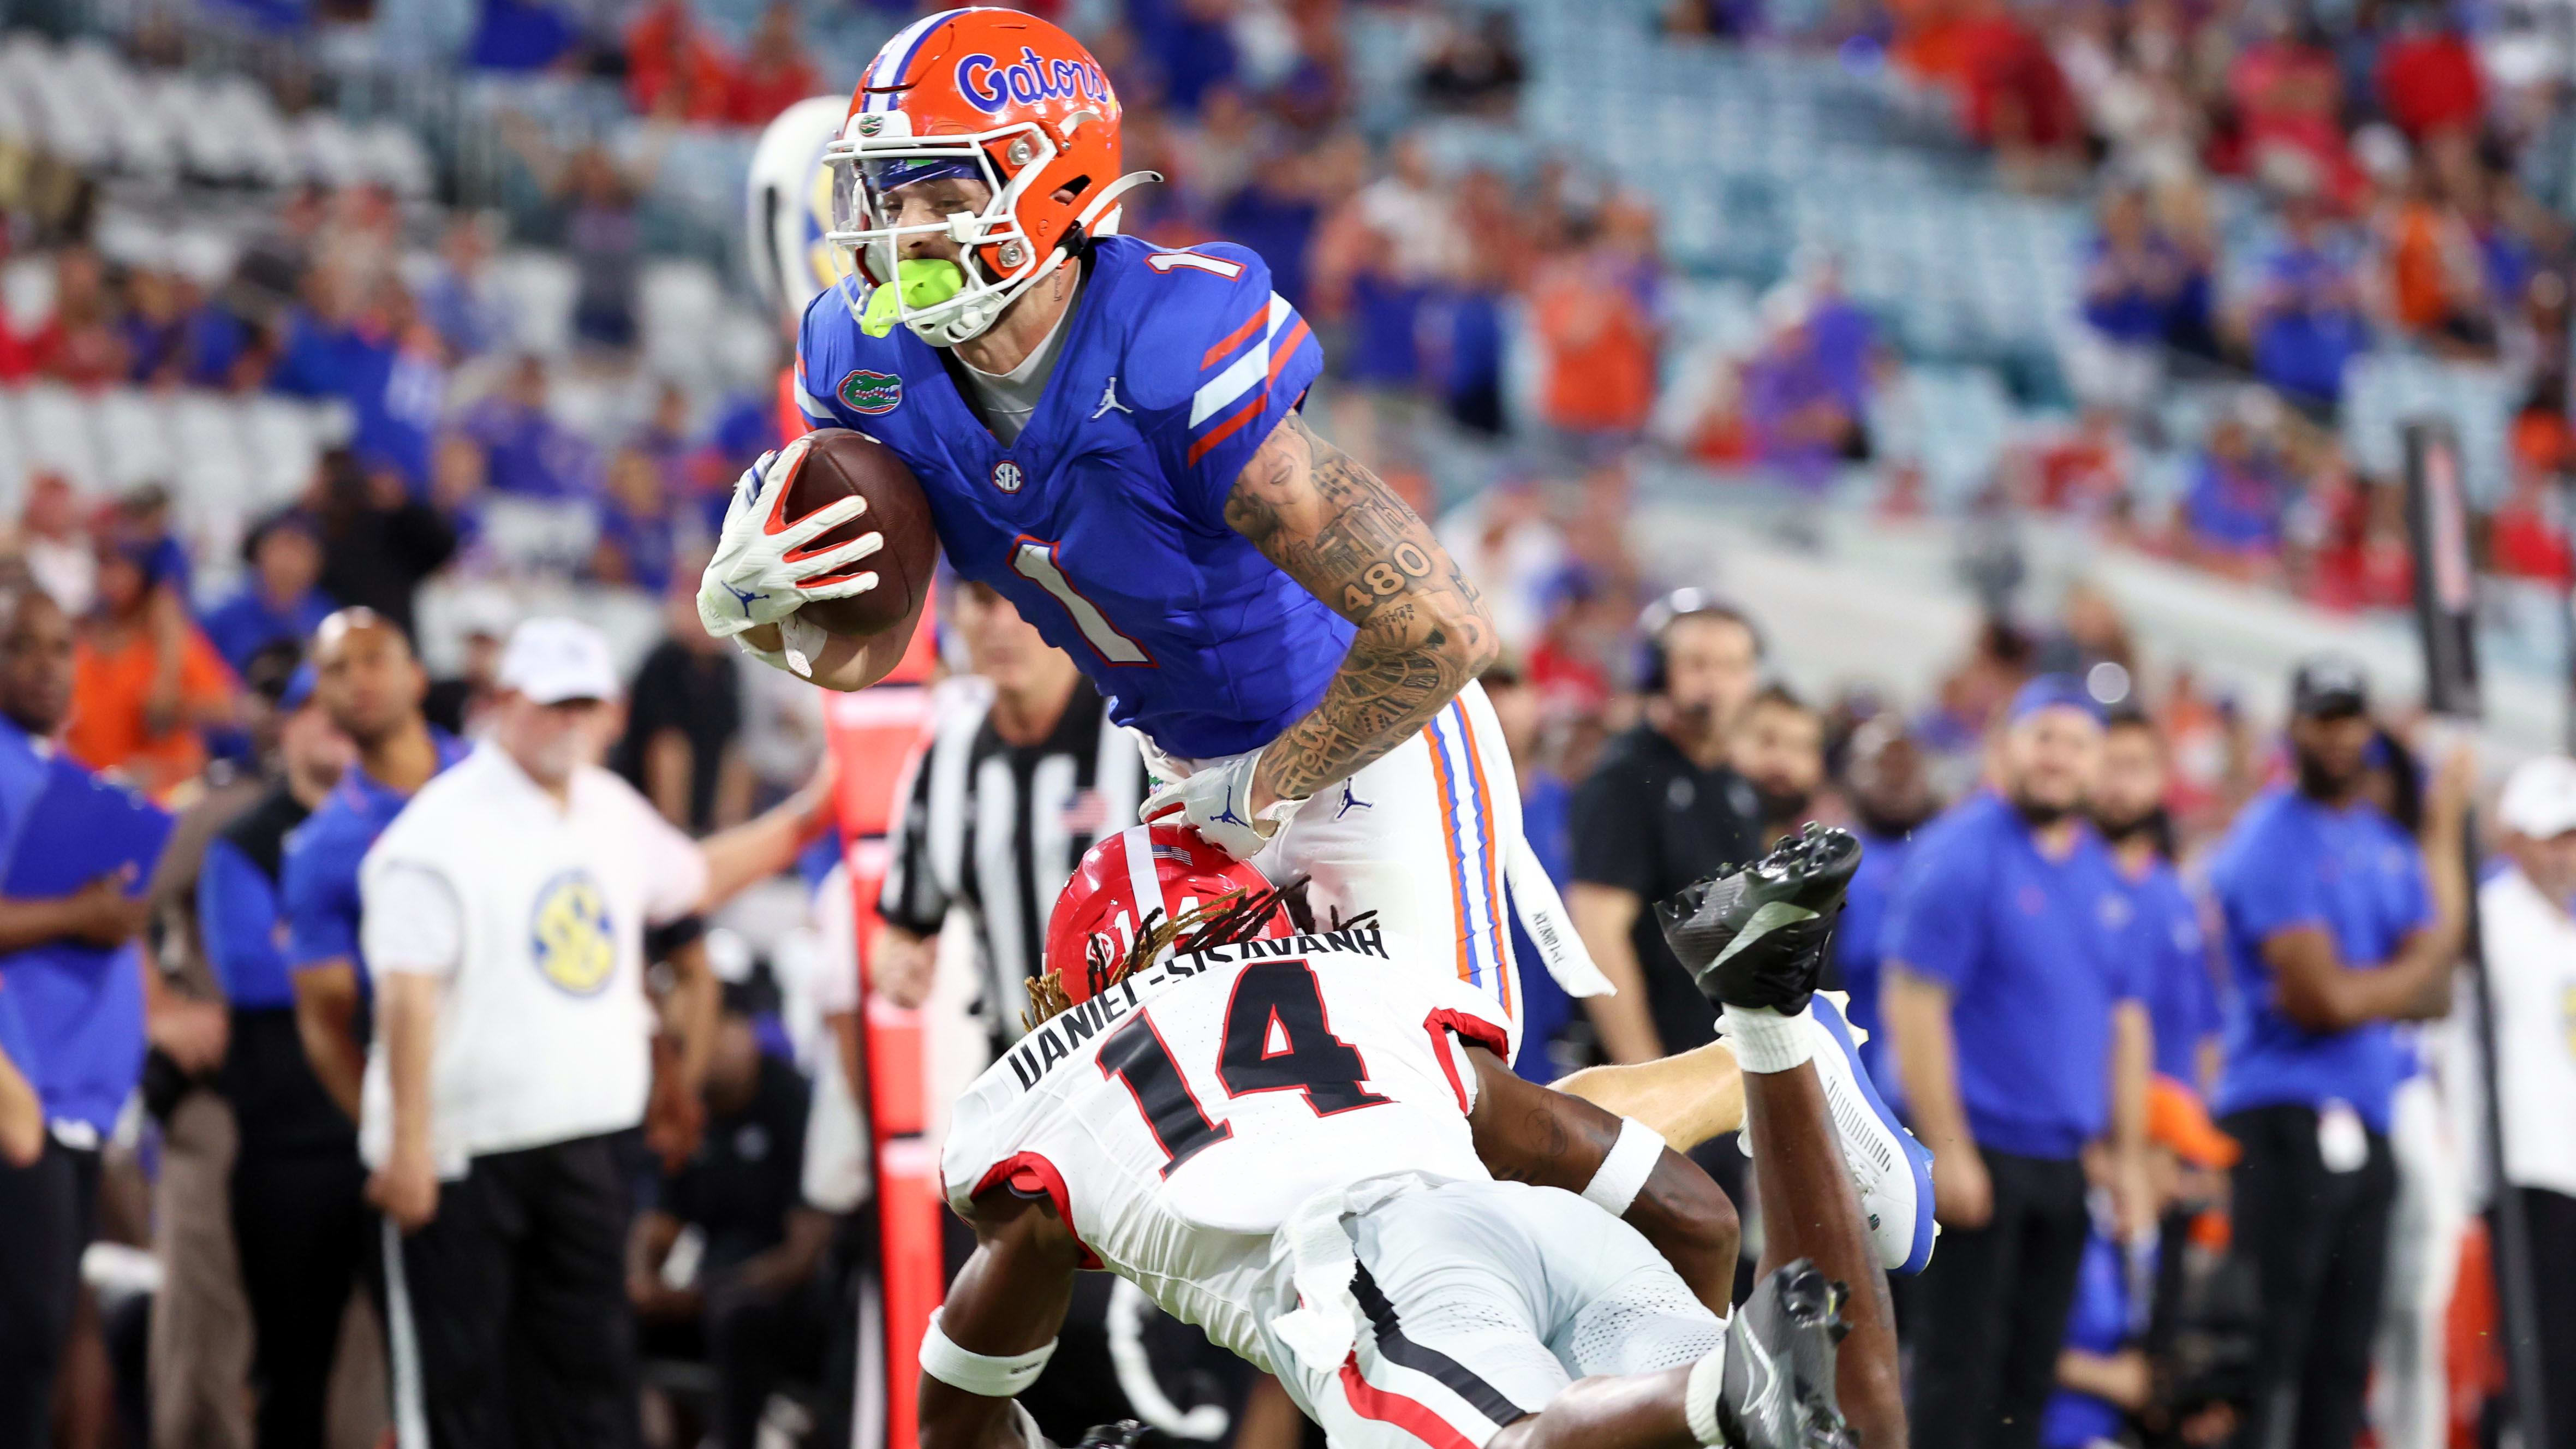 Florida Gators wide receiver Ricky Pearsall is tackled by a Georgia defender.